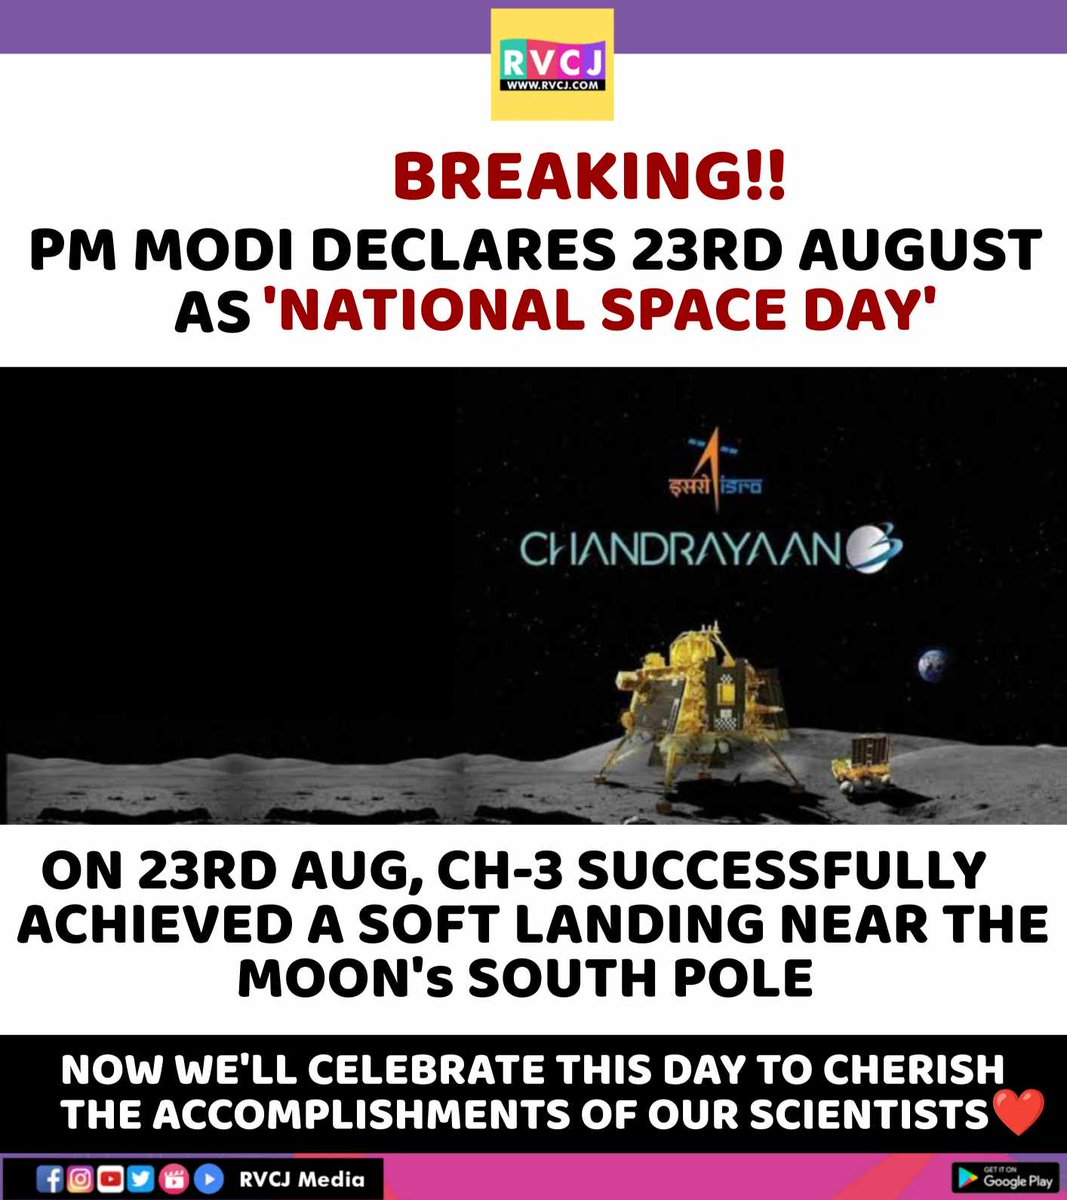 On August 23, when #India hosted the tricolor🇮🇳on the #Moon, that day will now be celebrated as National Space Day.
#Chandrayaan3 #ISRO #NationalSpaceDay #ShivShakti #VikramLander #NarenderaModi #23aug #spaceday #Chandrayan3 #Chandrayaan3Mission #isroindia #IndiaOnMoon #MetroInMP